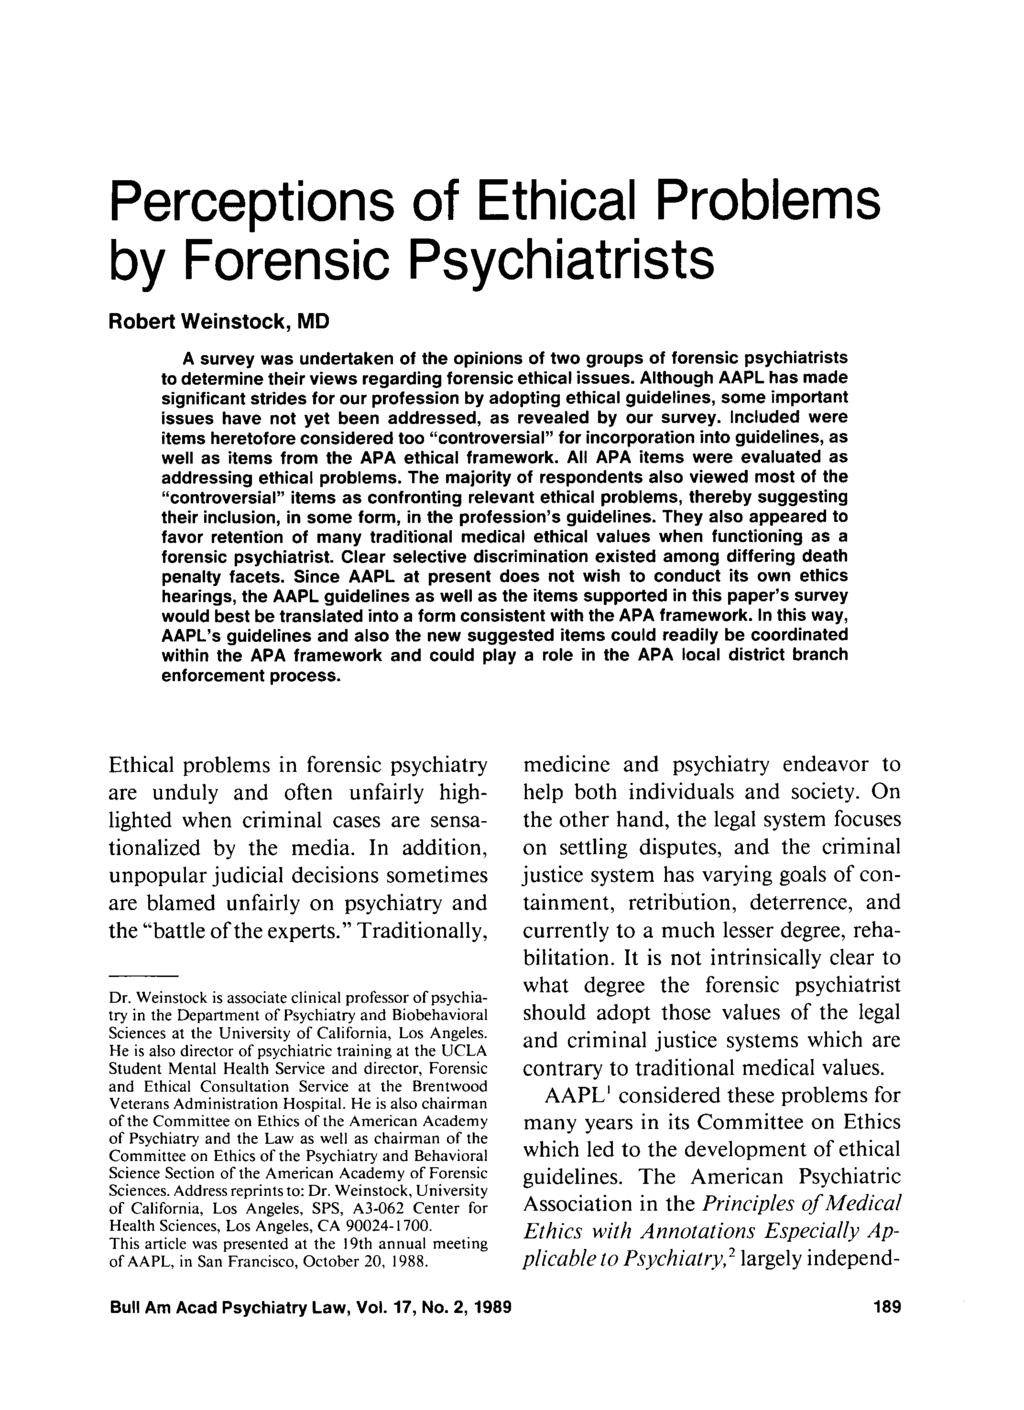 Perceptions of Ethical Problems by Forensic Psychiatrists Robert Weinstock, MD A survey was undertaken of the opinions of two groups of forensic psychiatrists to determine their views regarding